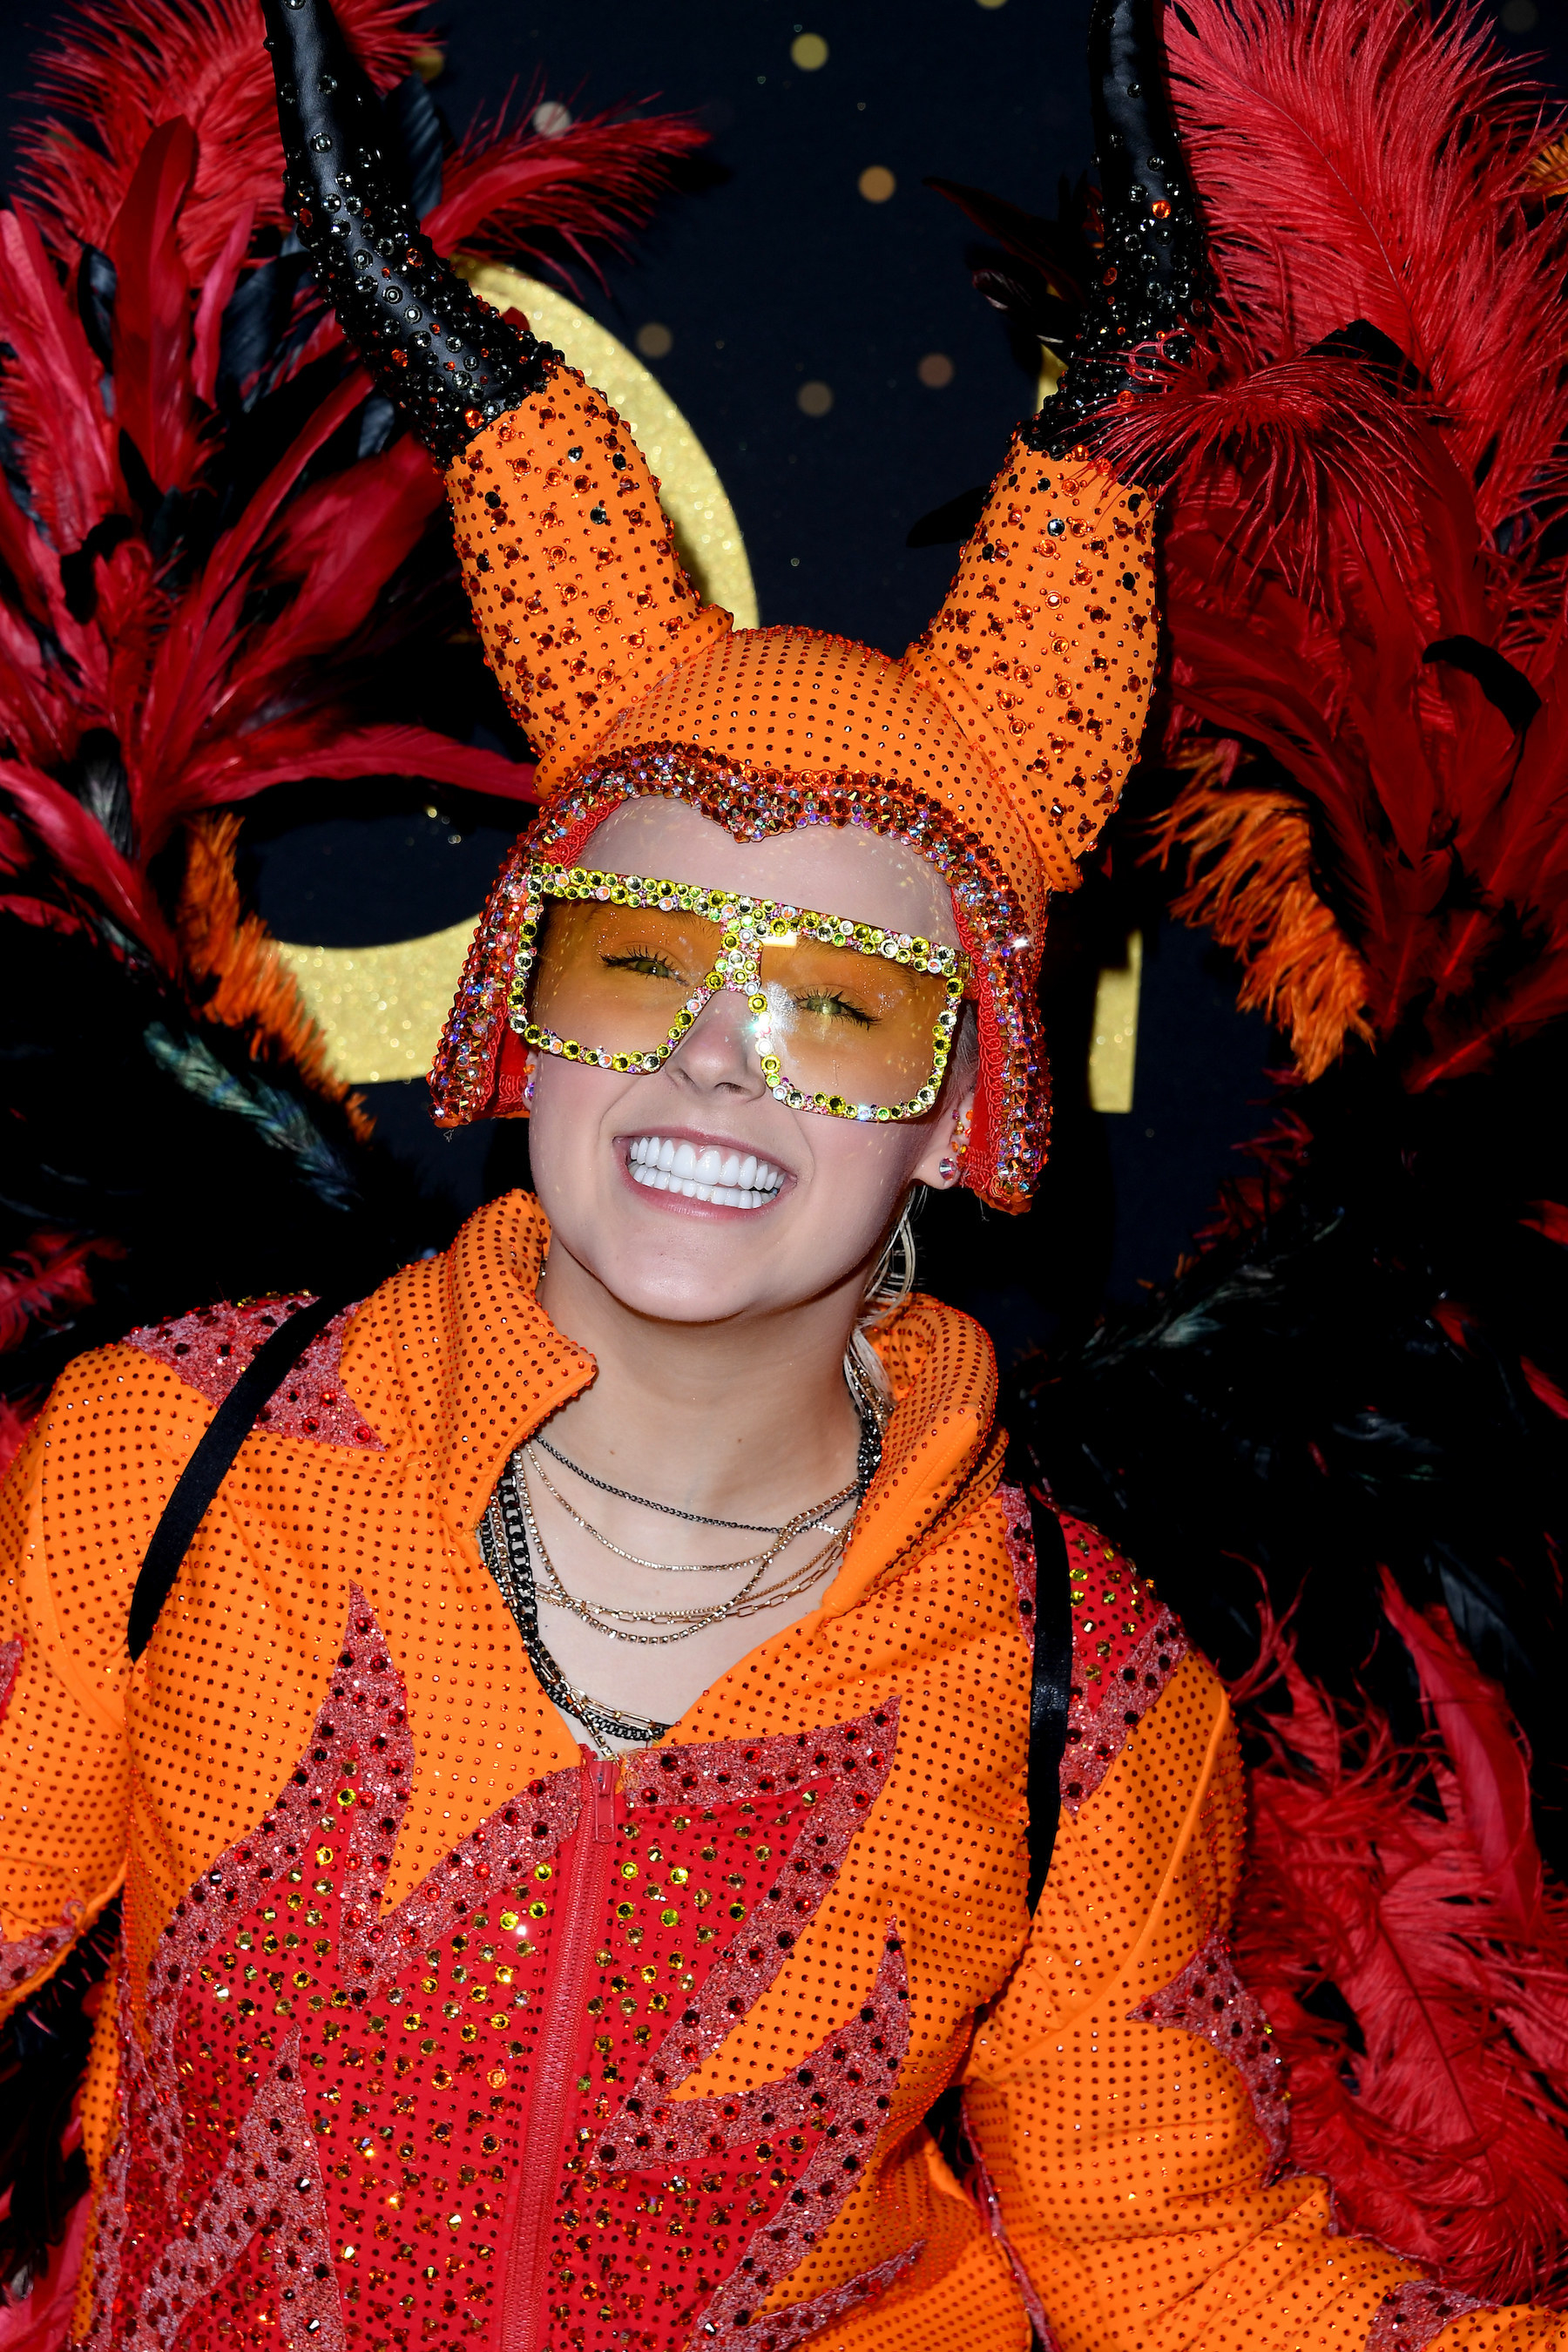 JoJo smiles widely as she rocks a bedazzled jacket with flame details and large bedazzled tinted glasses